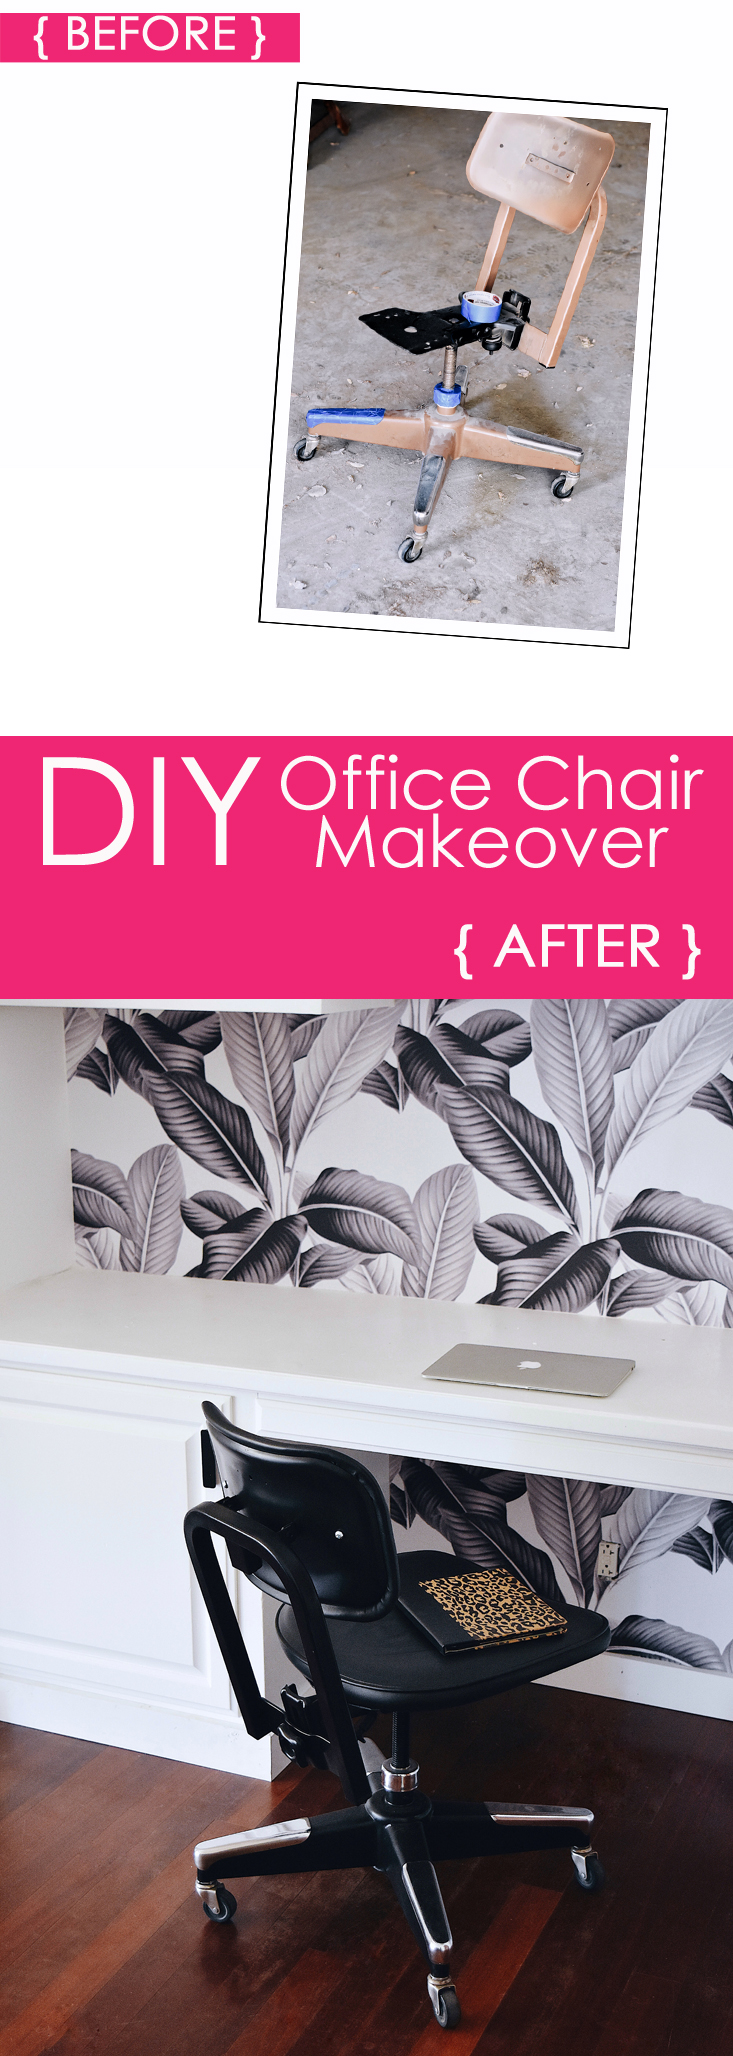 Before and After Office Chair Makeover